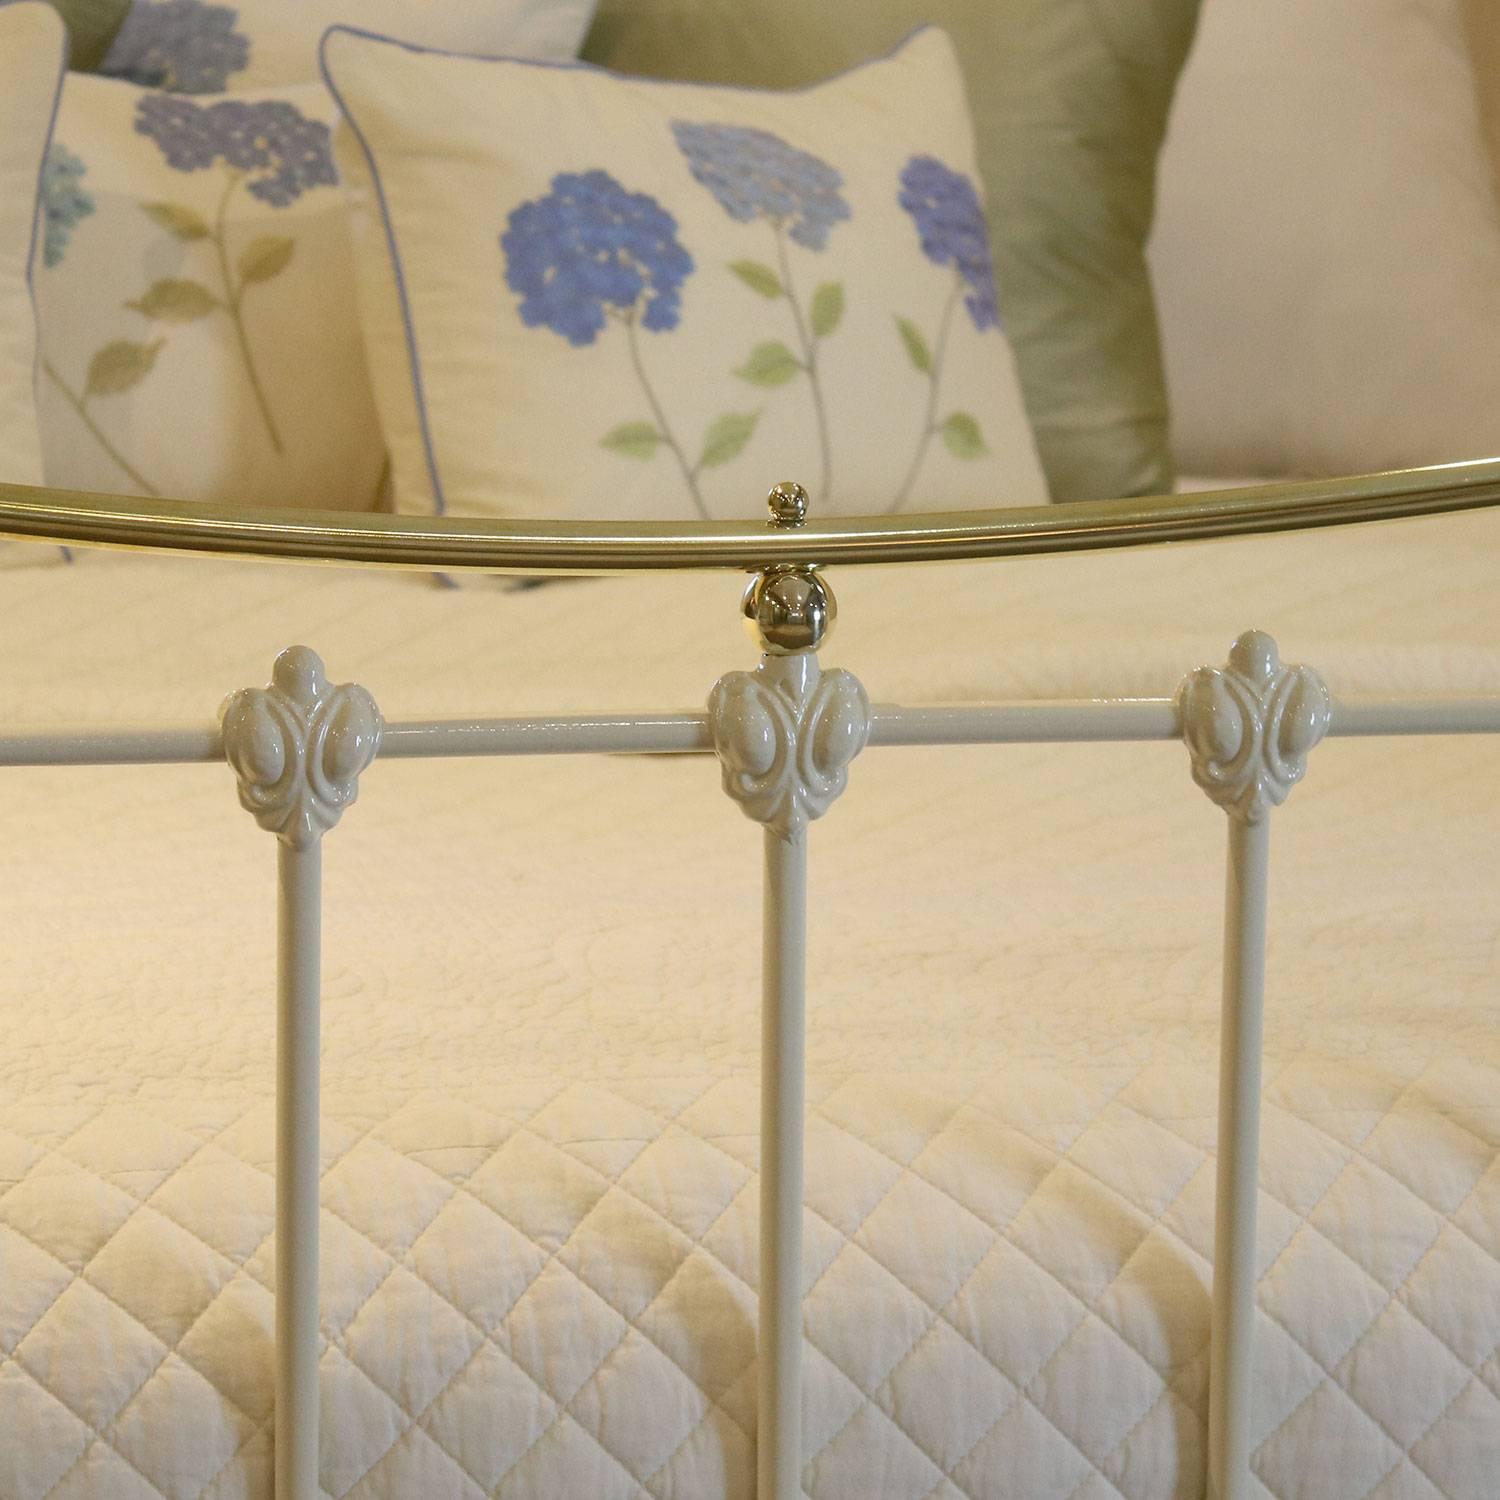 A brass and iron bed in cream with curved brass top rails, adapted from an original Victorian frame, circa 1895.

This bed accepts a British super king-size or Californian King (6ft, 72 inches or 180cm wide) base and mattress set.

The price is